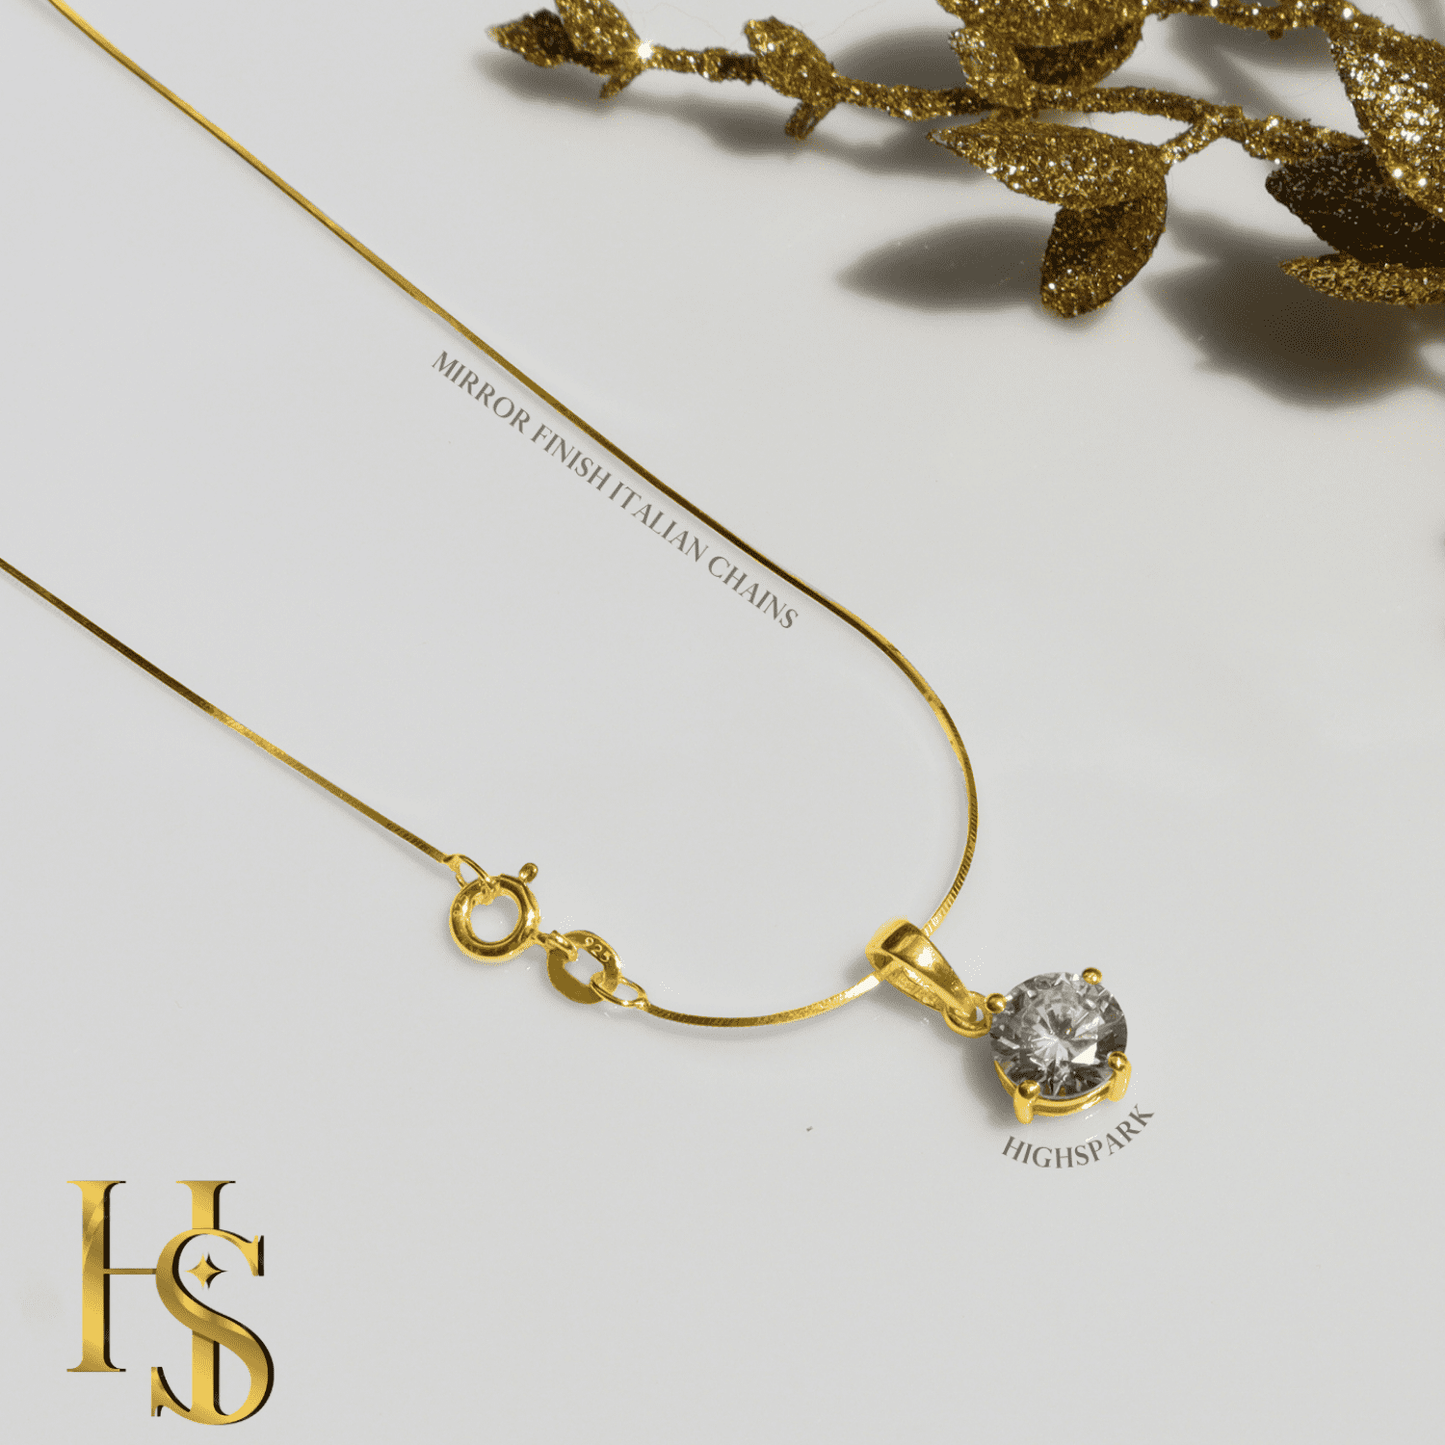 Solitaire Set - Round Earrings, Pendant & Chain in 92.5 Silver embellished with Swarovski Zirconia - 18K Gold finish